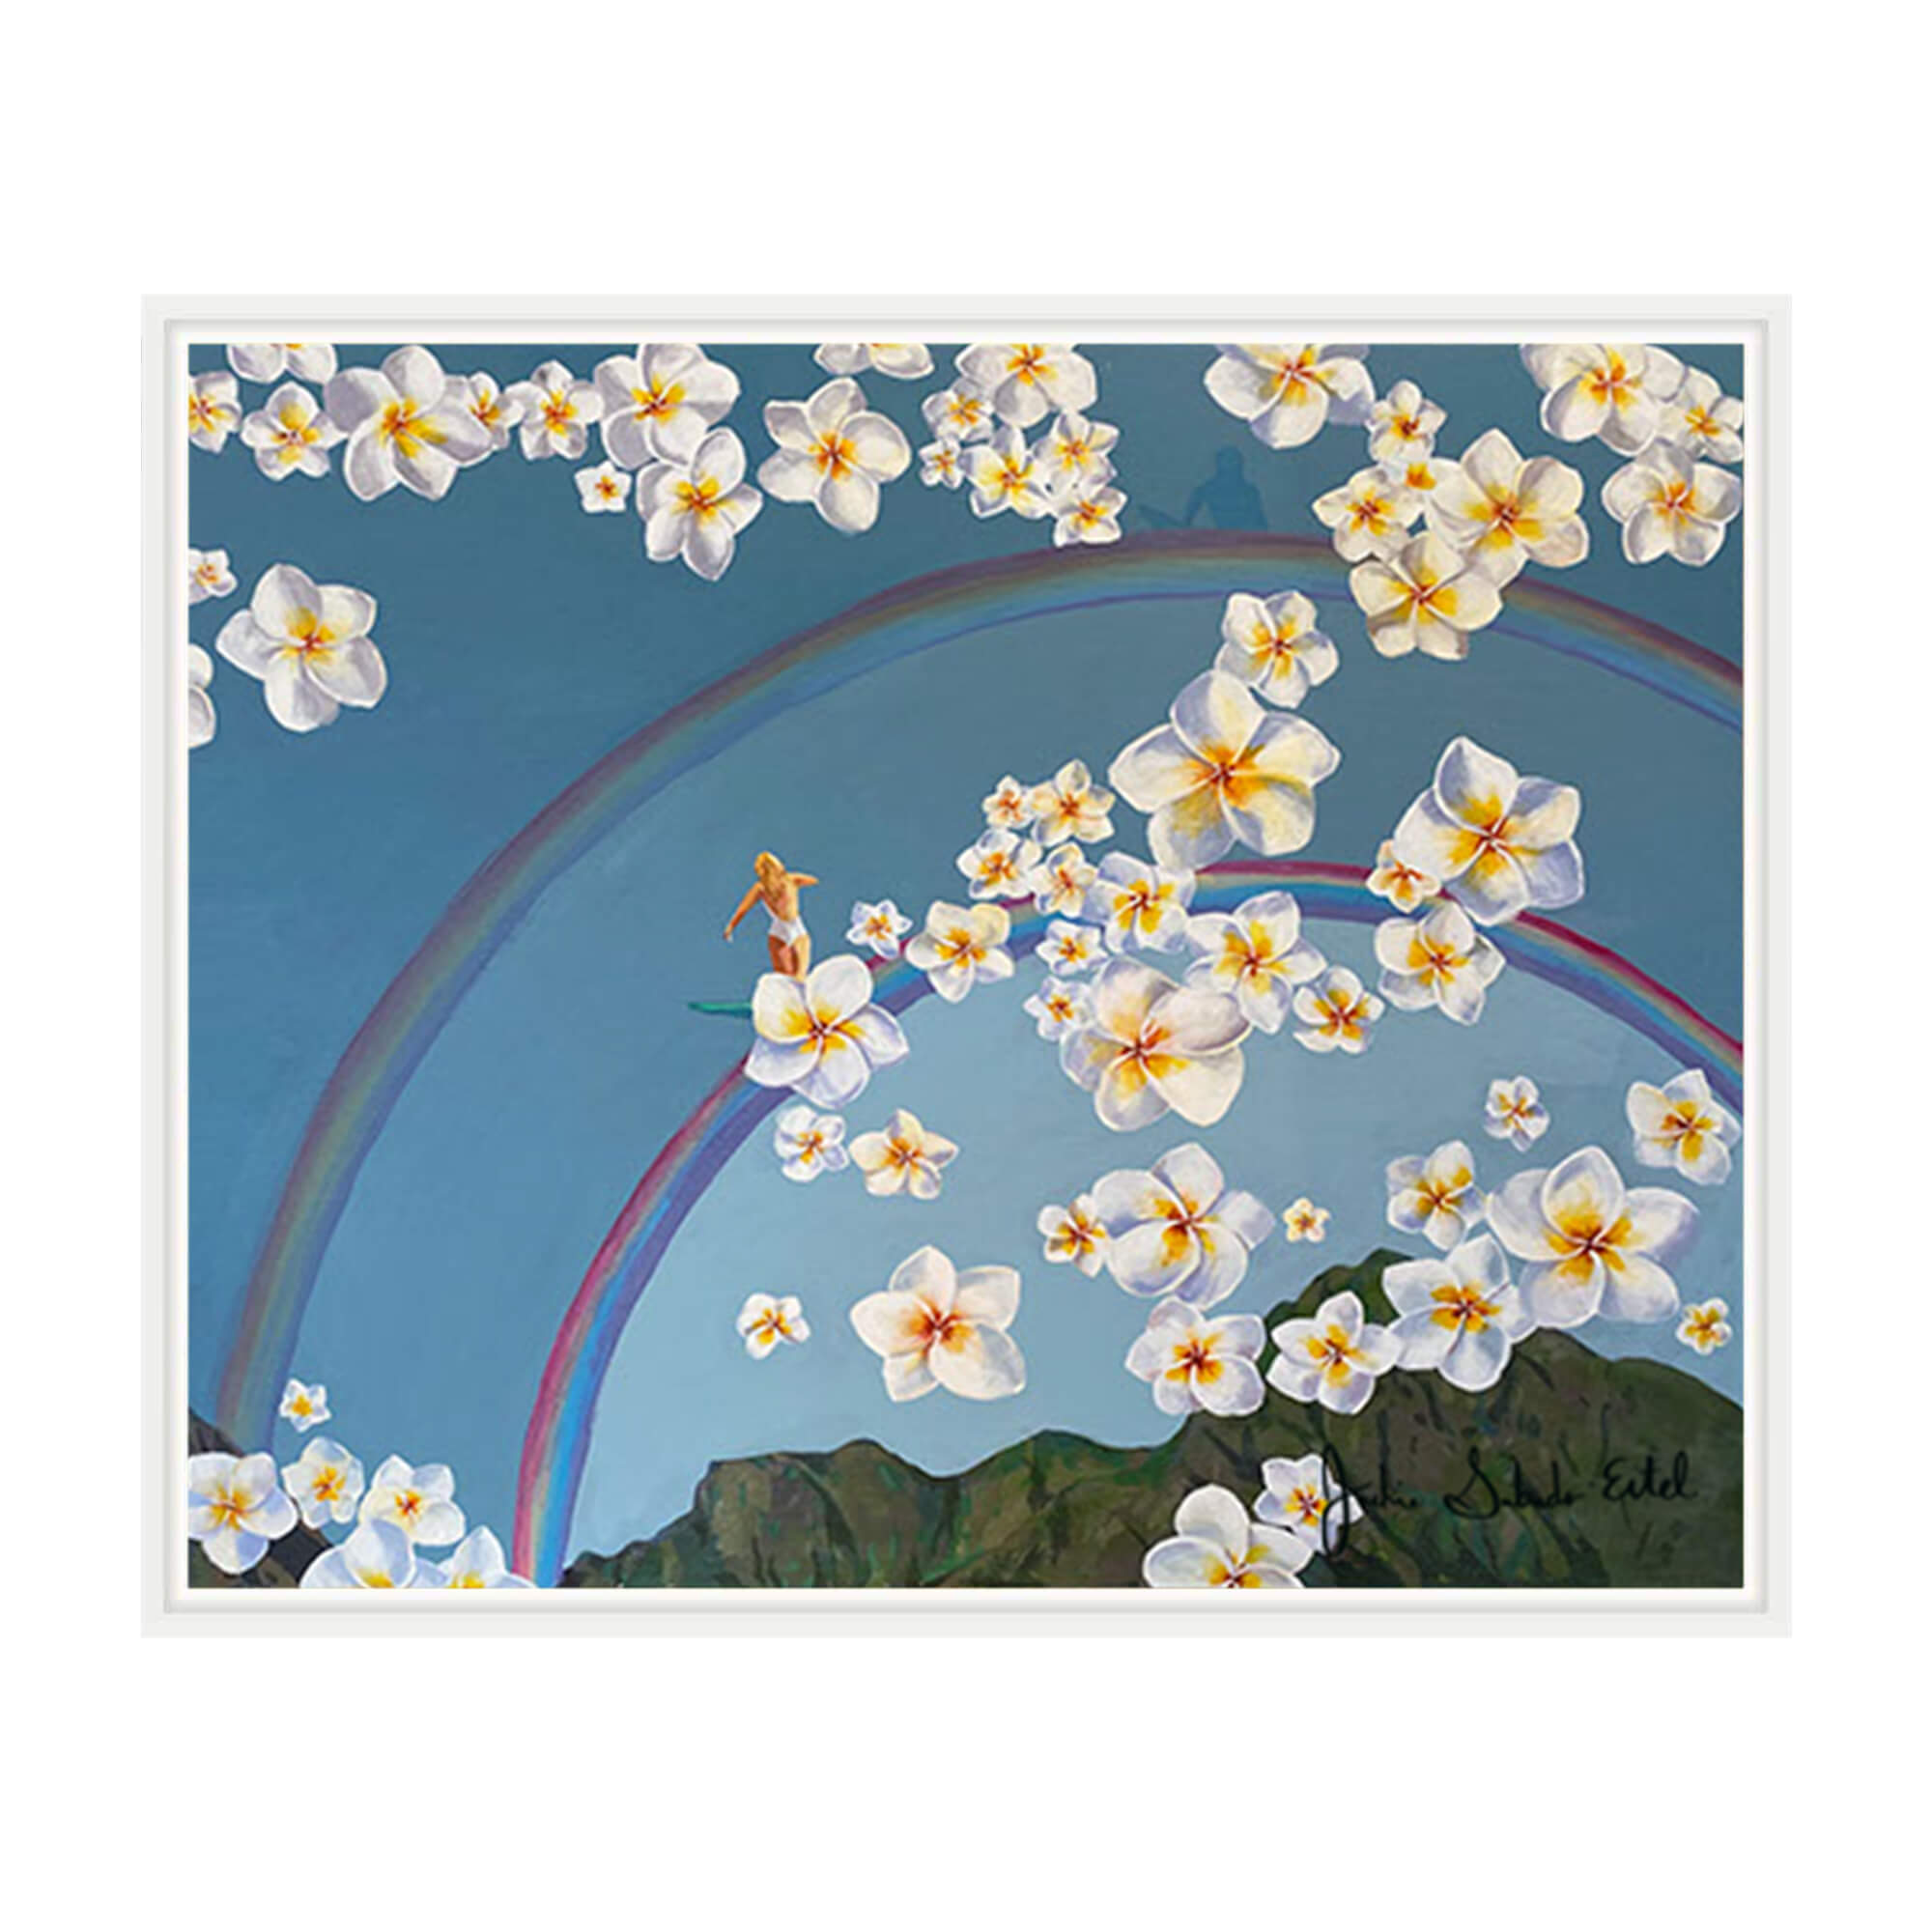 A framed canvas giclée print featuring a woman surfing on a rainbow above the mountains of Hawaii framed by plumeria flowers by Hawaii artist Jackie Eitel